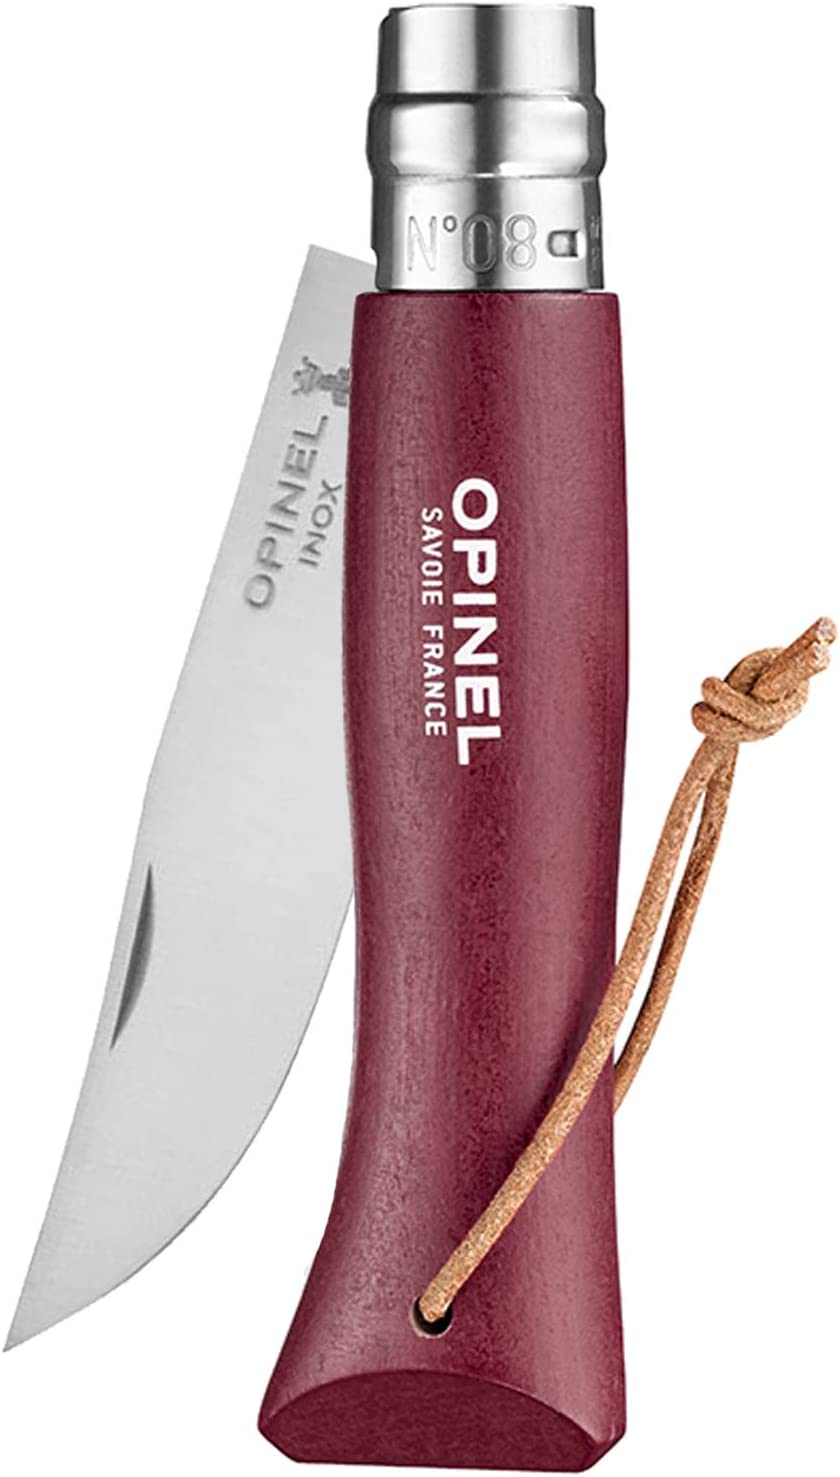 OPINEL No. 08 Colorama Earth